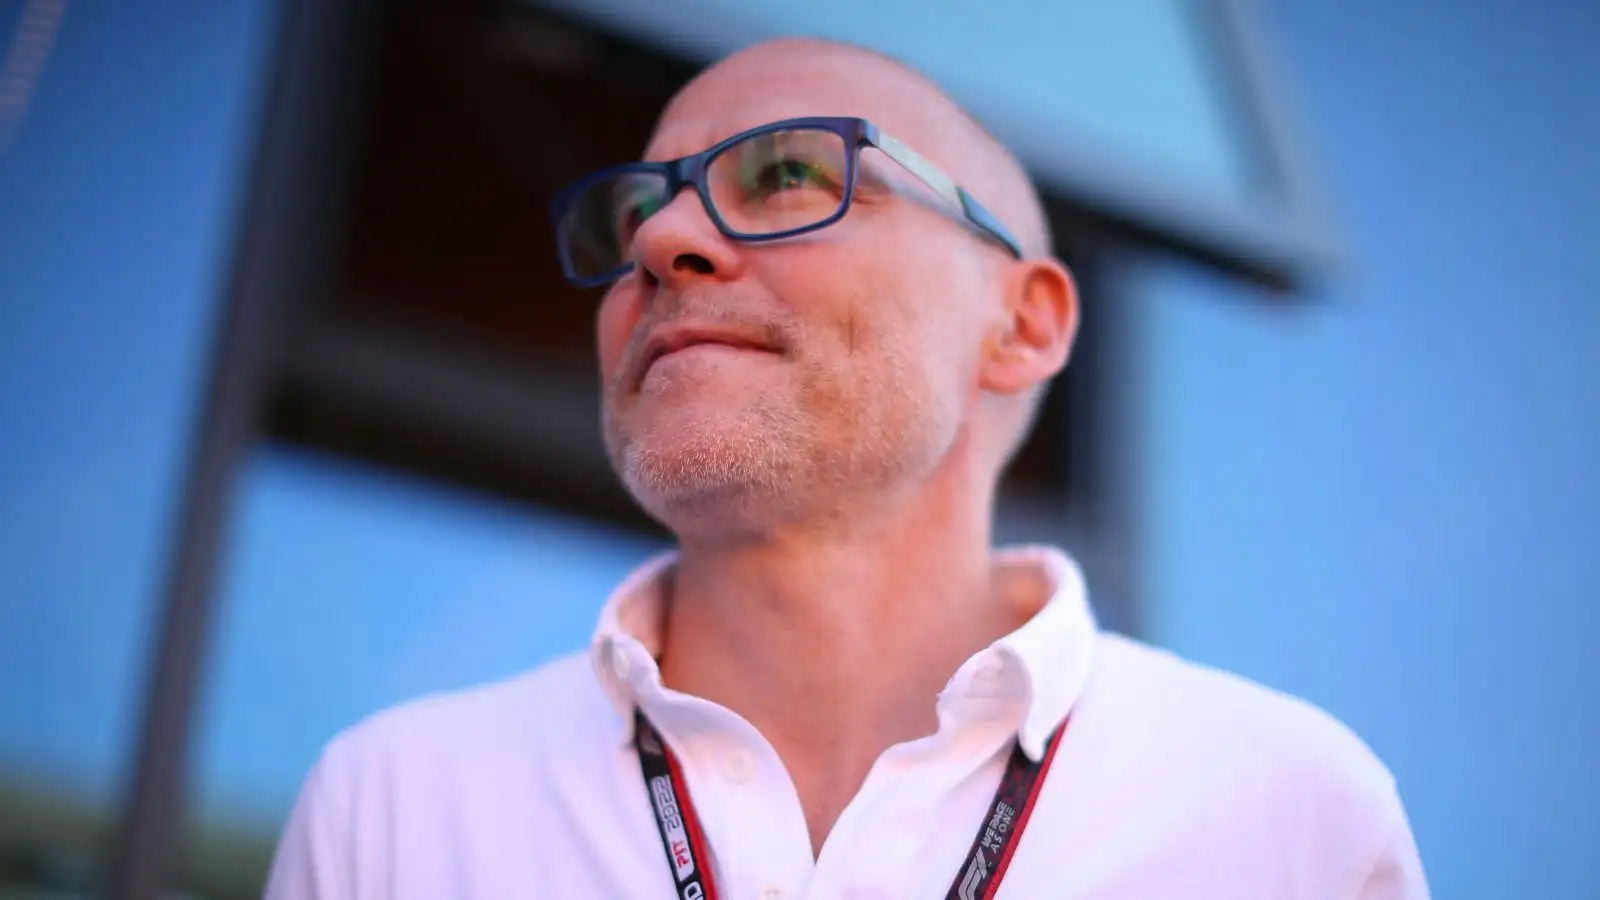 Jacques Villeneuve stares into the distance at the 2022 Italian Grand Prix at Monza.